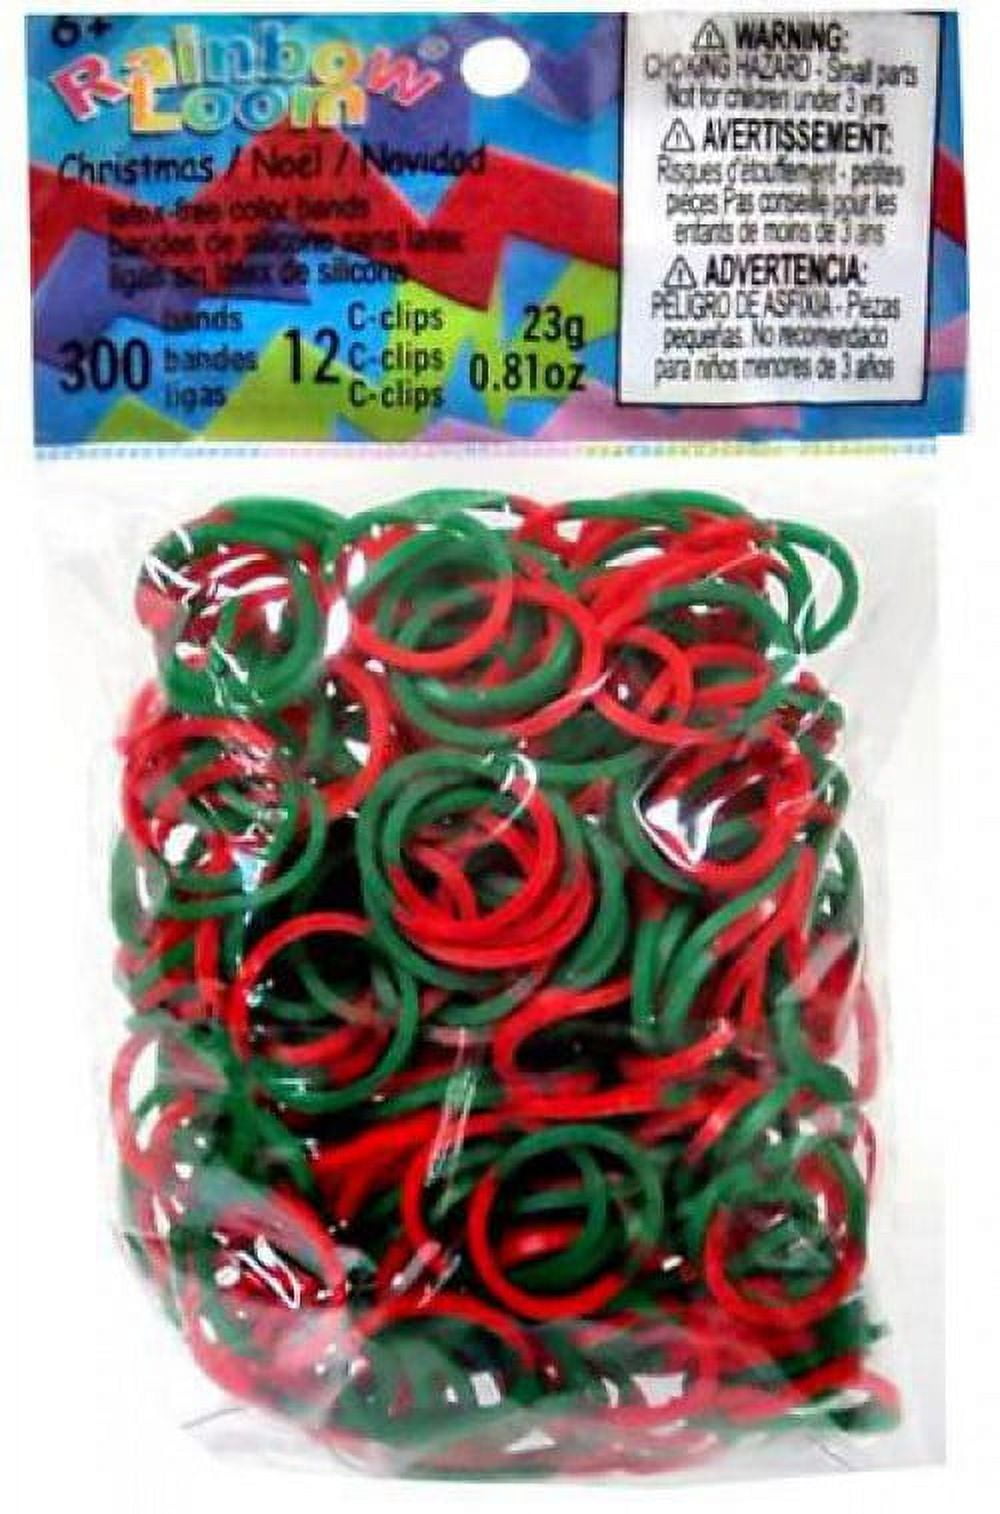 Rainbow Loom Multi-Color Rubber Bands Refill Pack [600 ct, NO C-CLIPS]